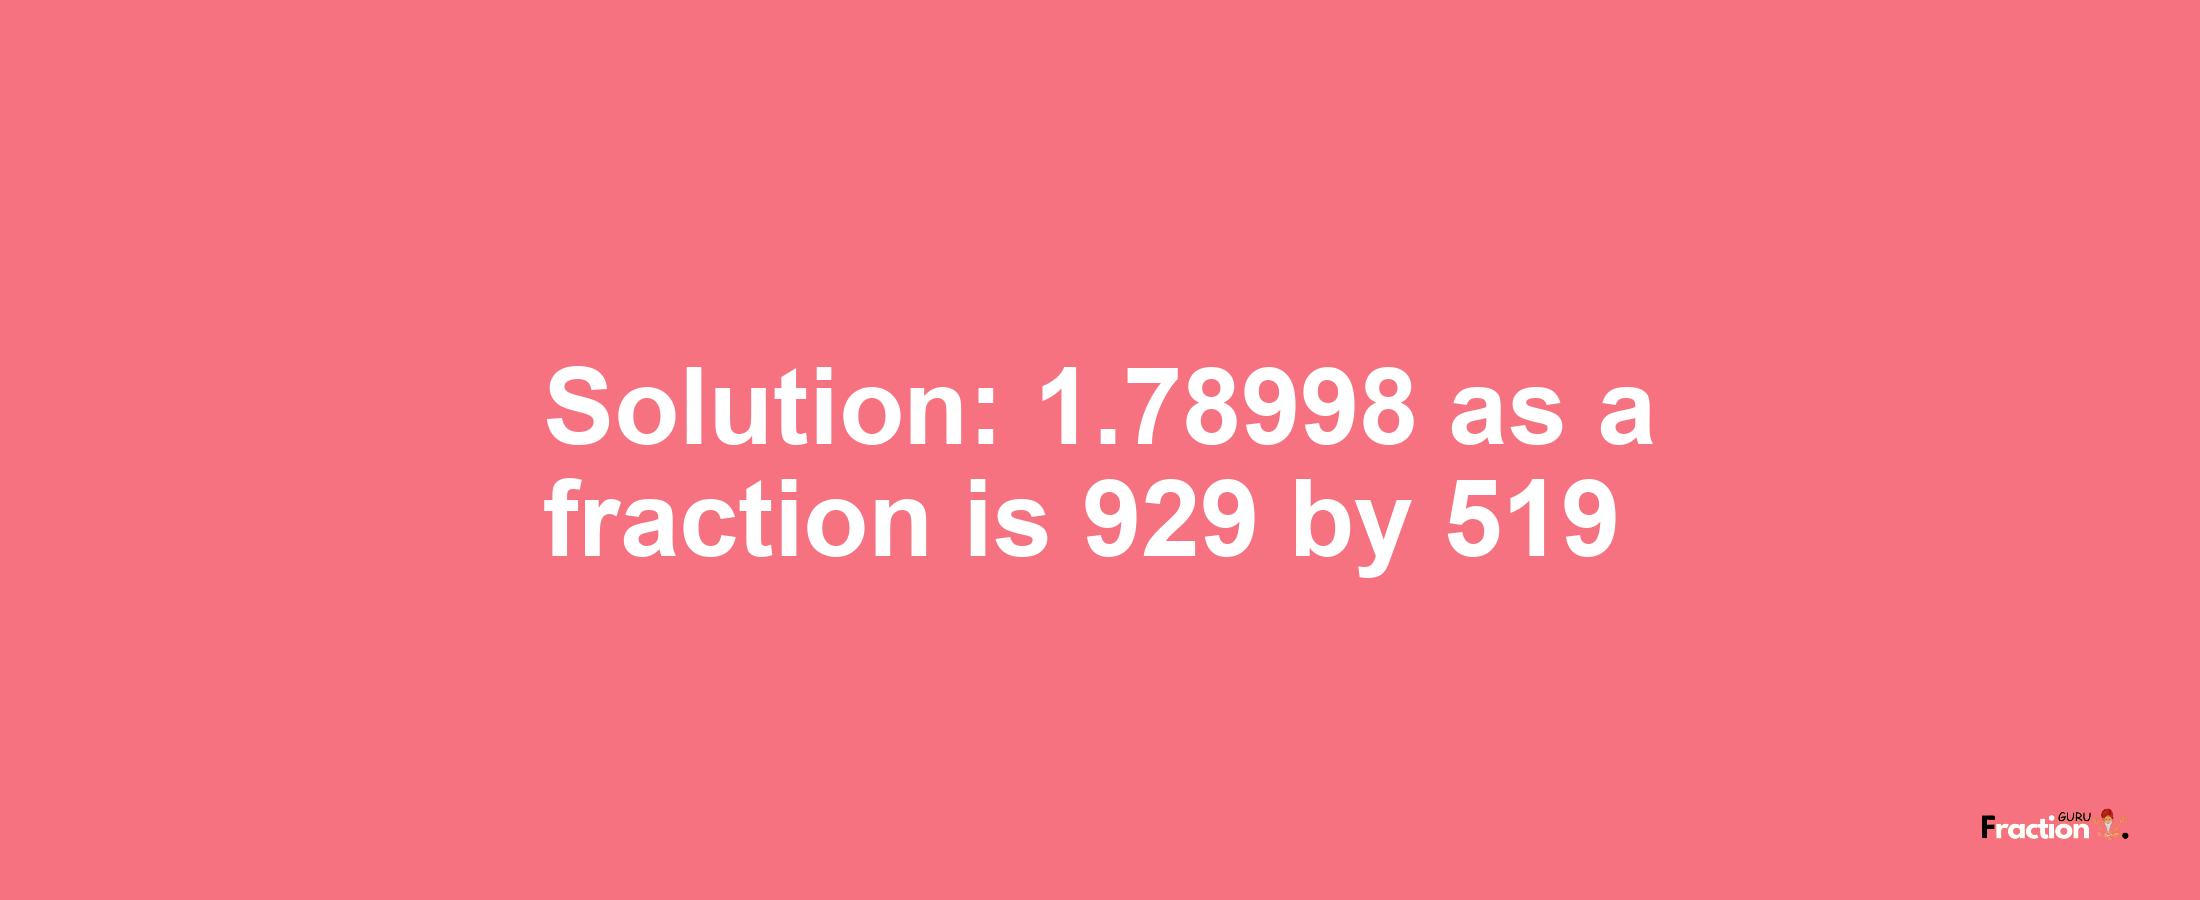 Solution:1.78998 as a fraction is 929/519